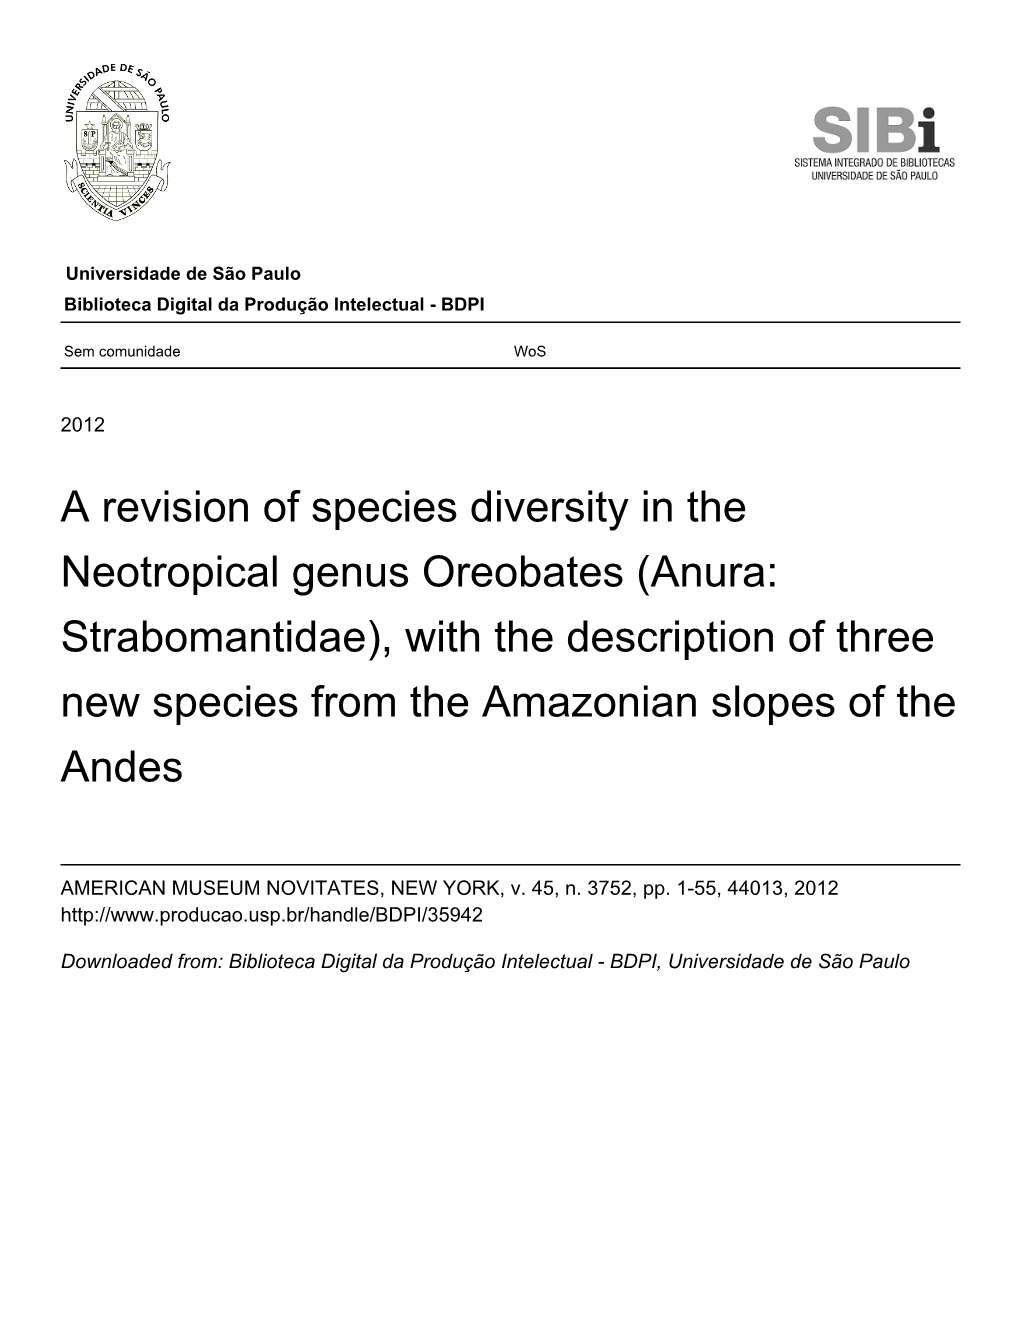 A Revision of Species Diversity in the Neotropical Genus Oreobates